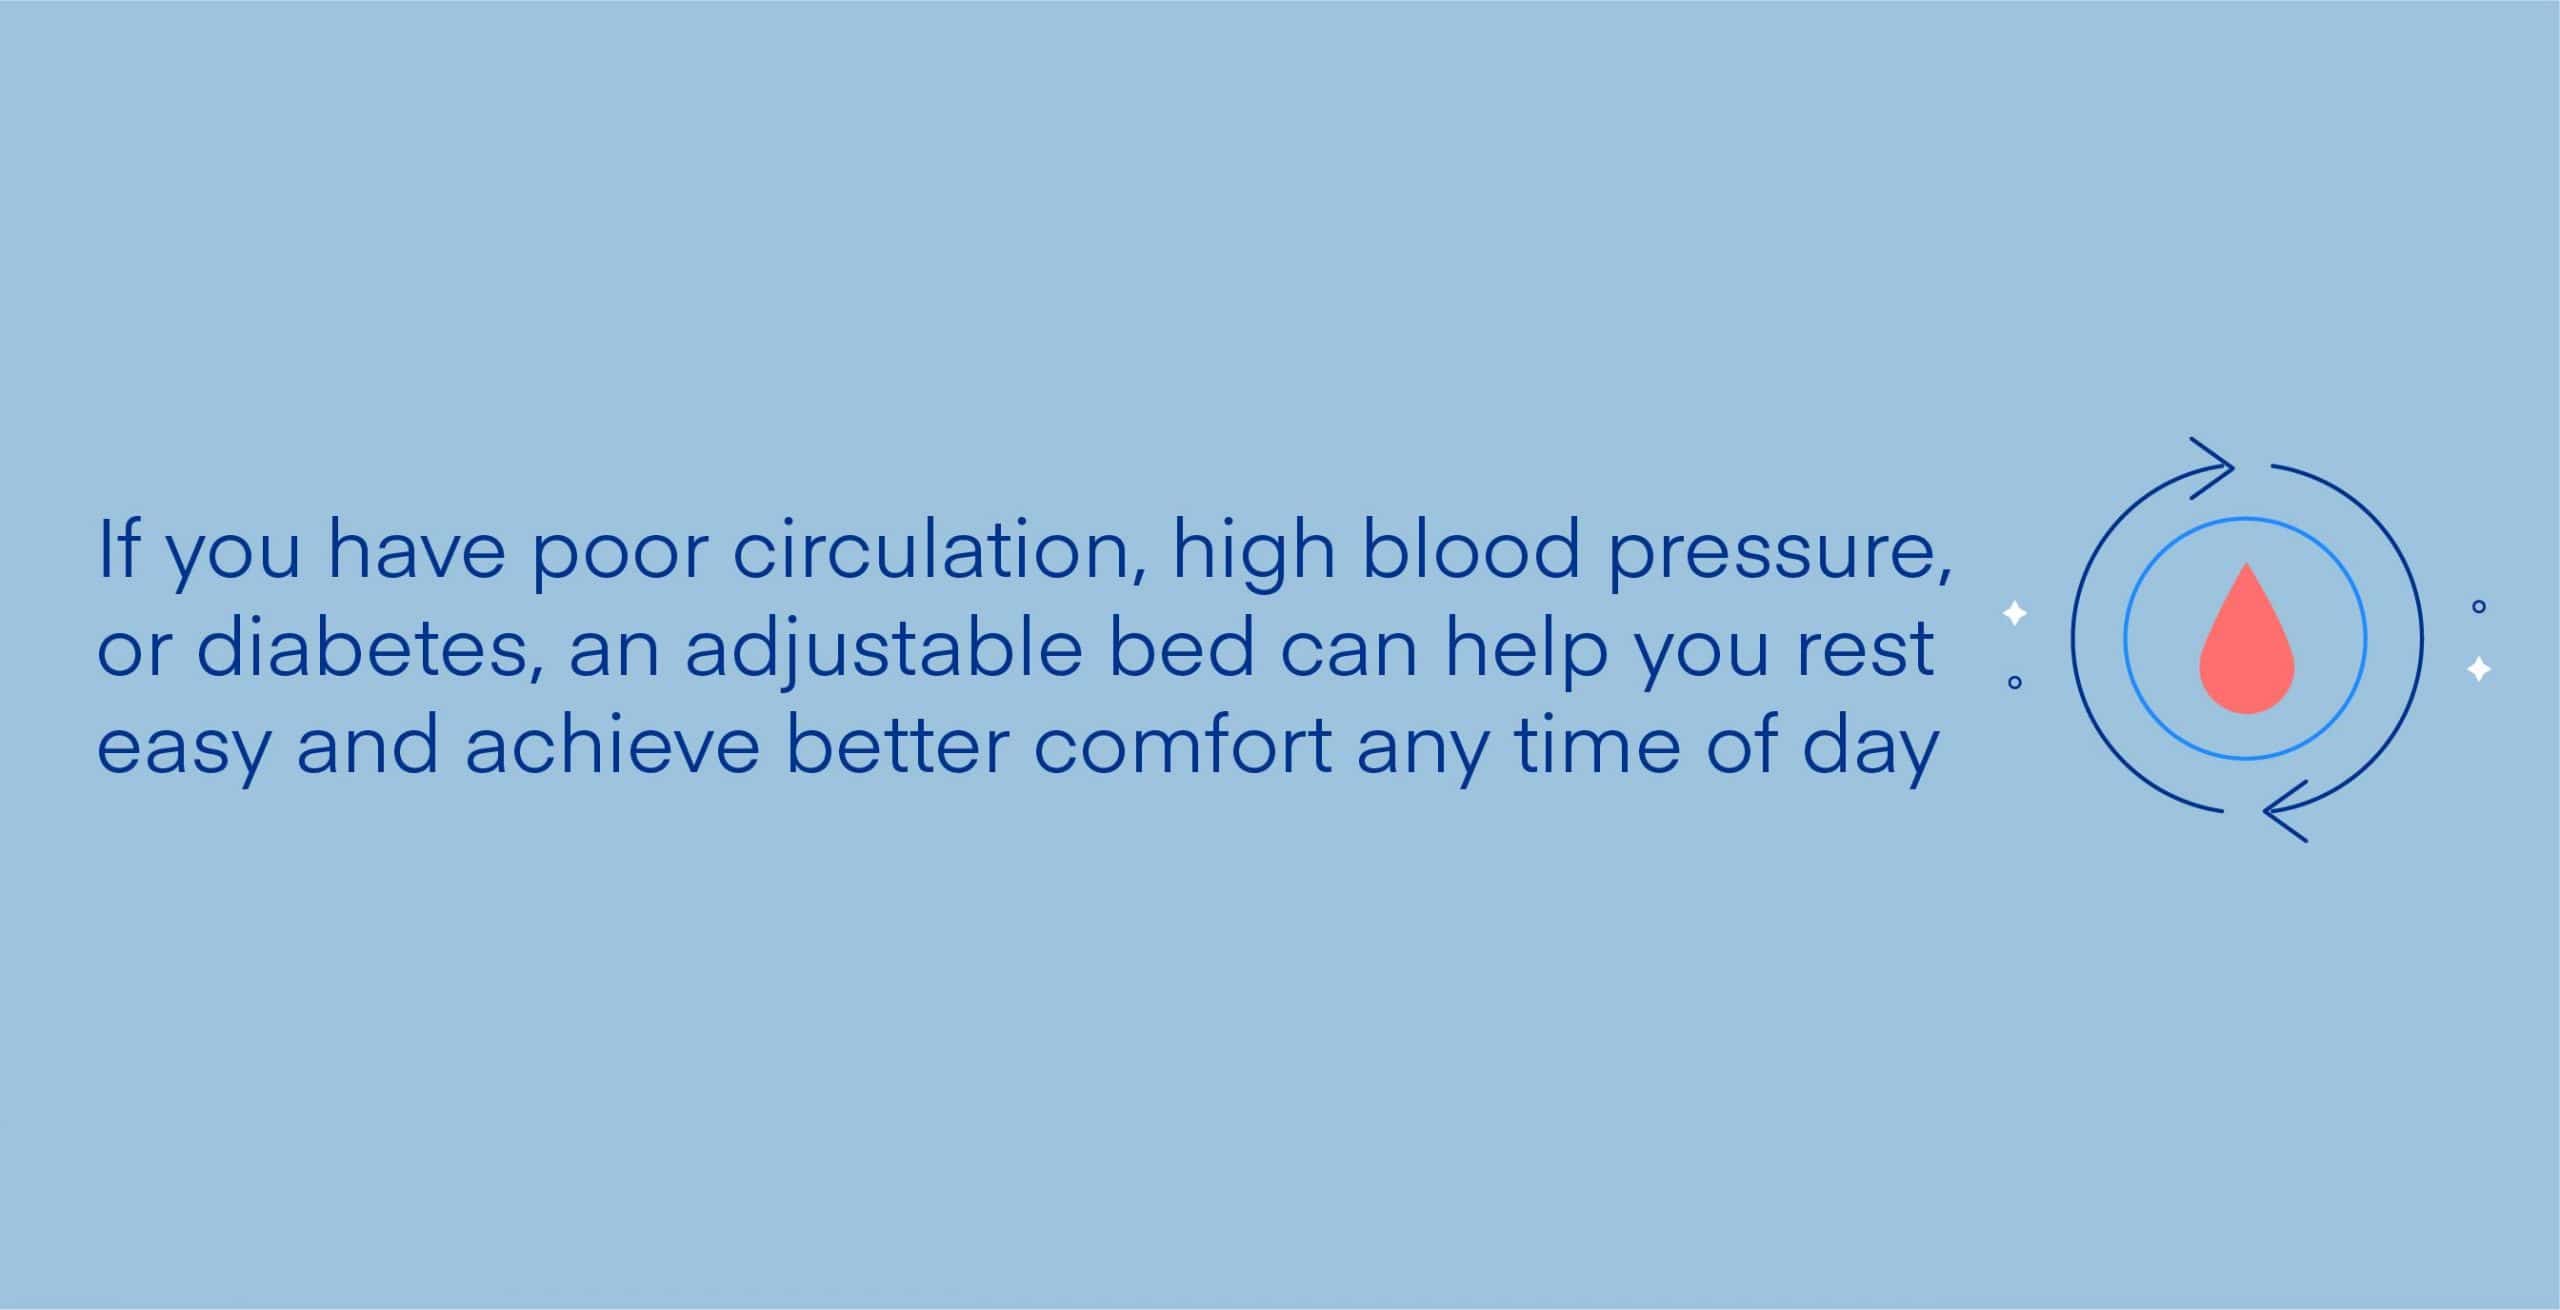 Benefits of an Adjustable Bed